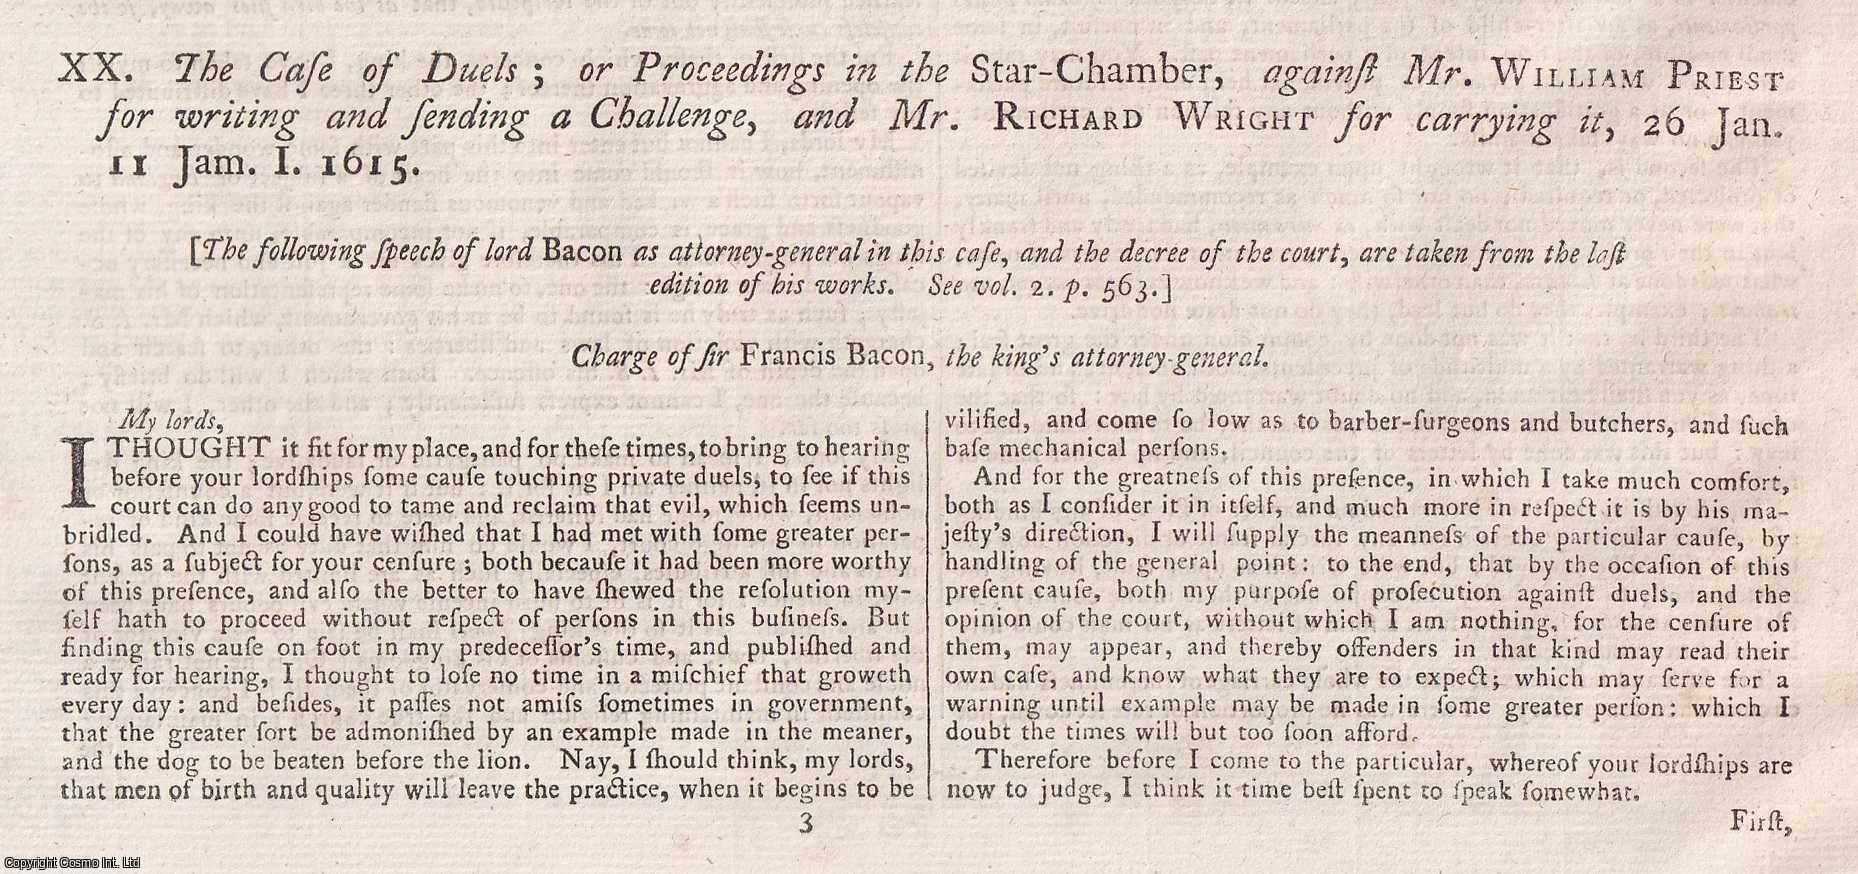 [Trial] - DUELLING. The Case of Duels; or Proceedings in the Star Chamber, against Mr William Priest for writing and sending a Challenge, and Mr Richard Wright for carrying it, 26 Jan, 1615. An original article from the Collected State Trials.